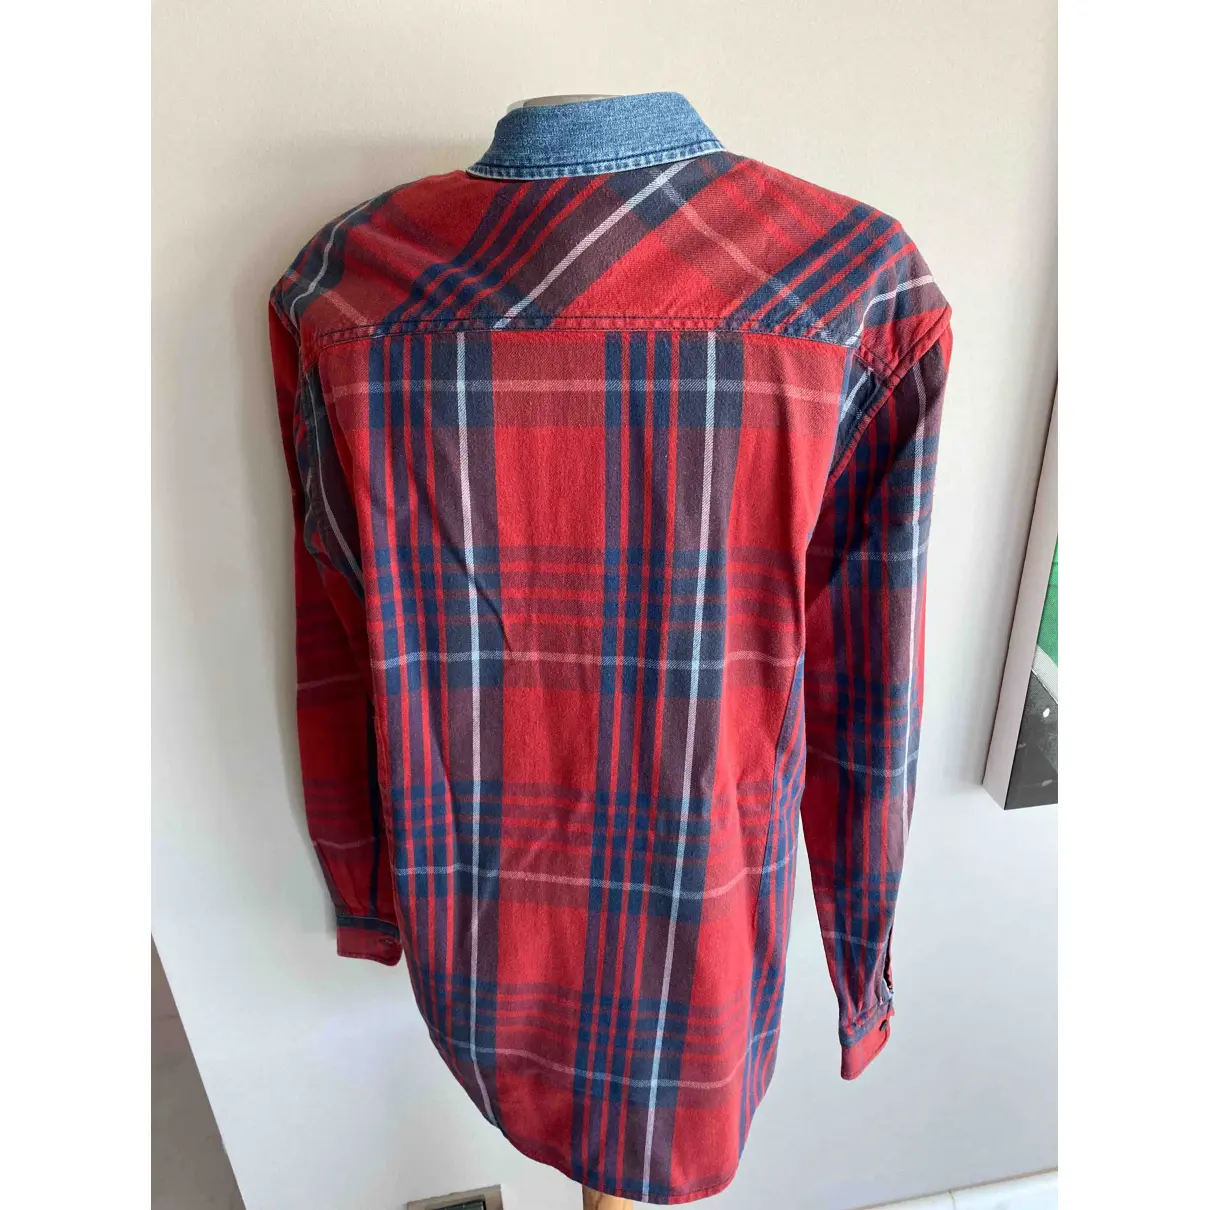 Buy PEPE JEANS Shirt online